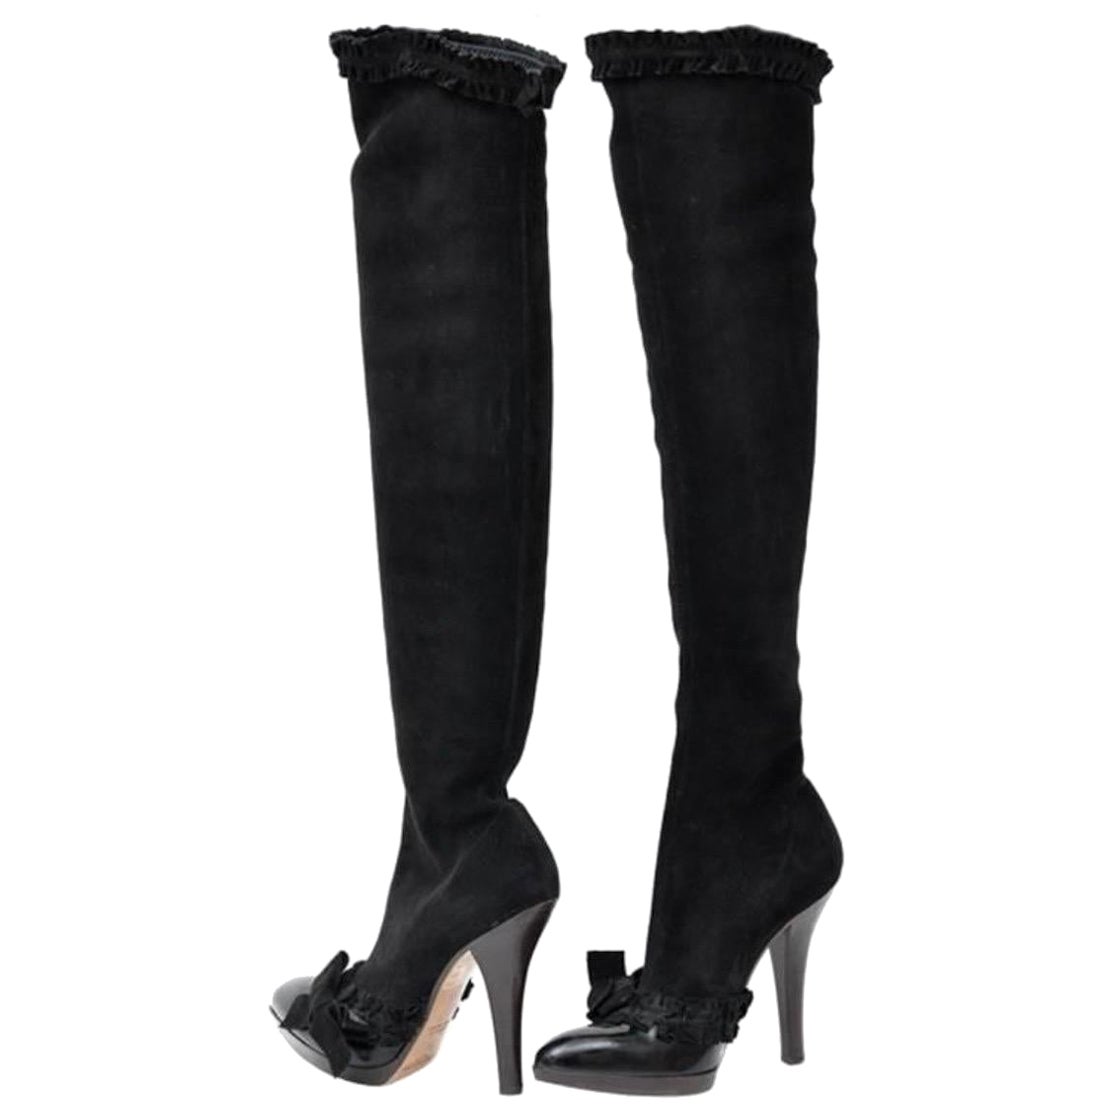 A/W 2001 Tom Ford for Yves Saint Laurent Black Suede Over the Knee Boots 37 - 7 For Sale